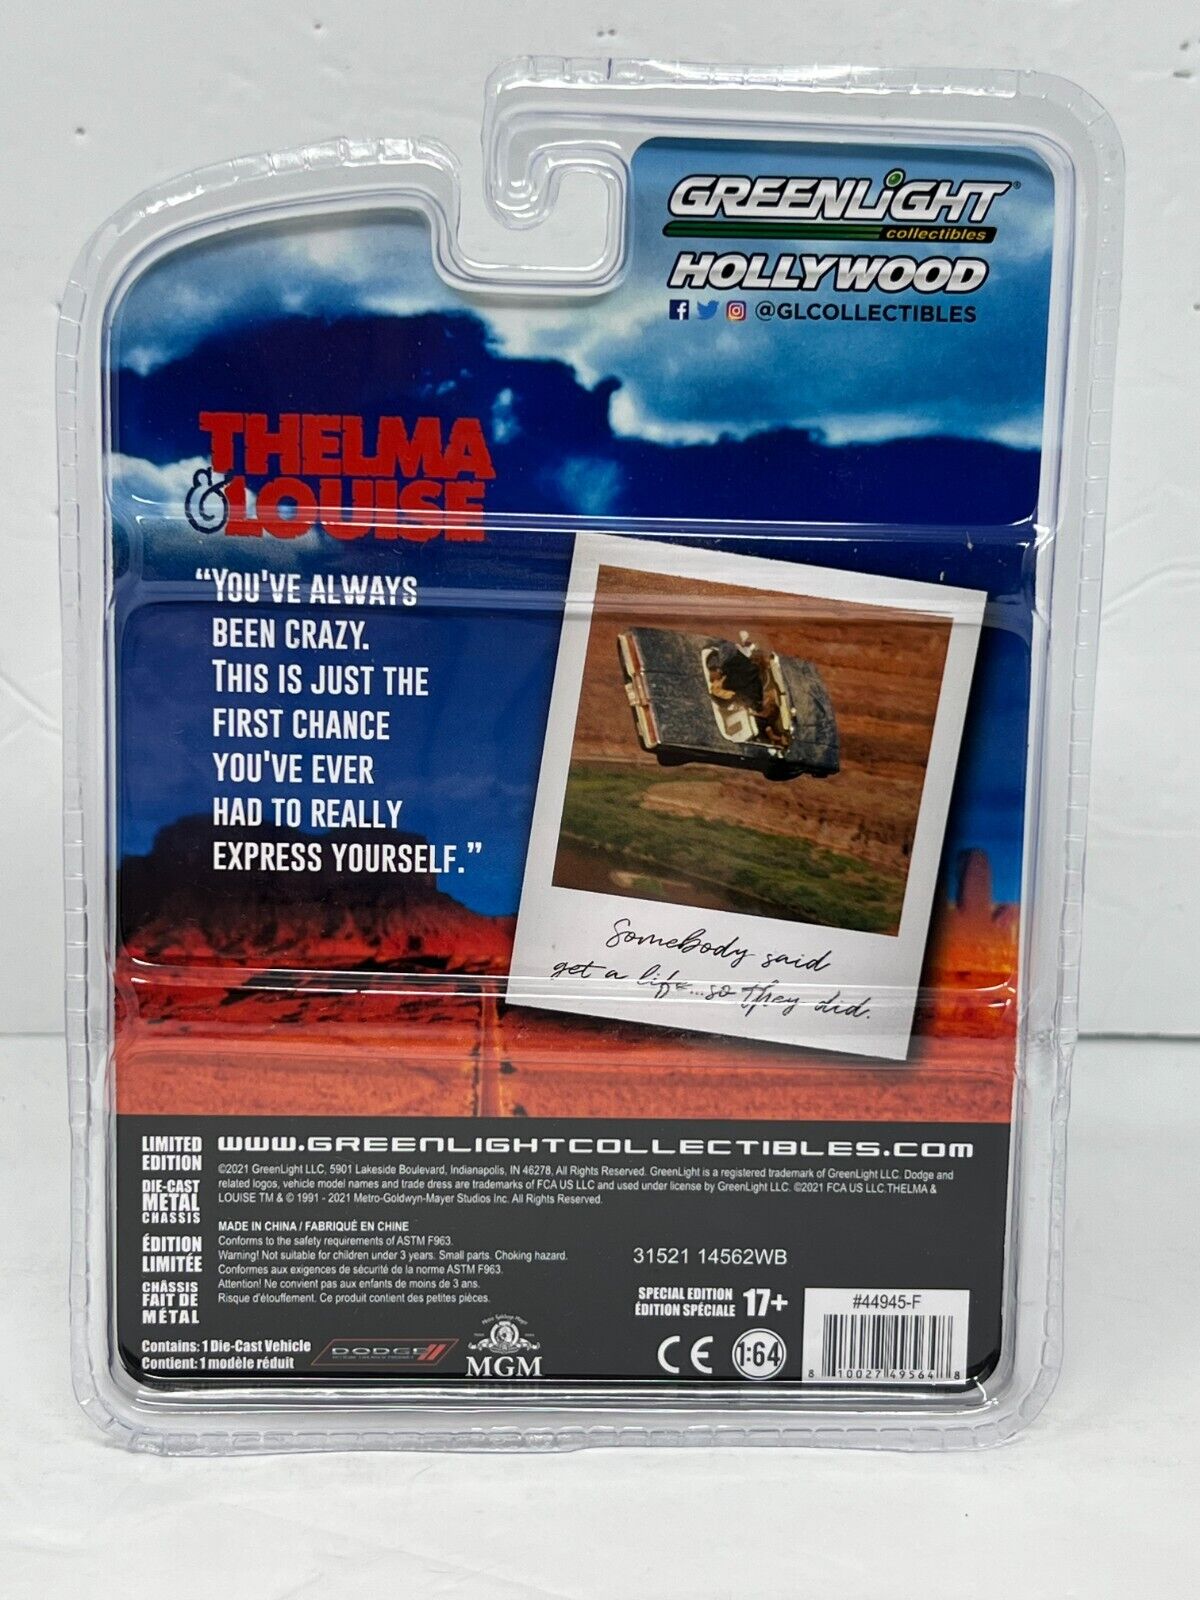 Greenlight Hollywood Thelma & Louise 1984 Dodge Diplomat 1:64 Diecast